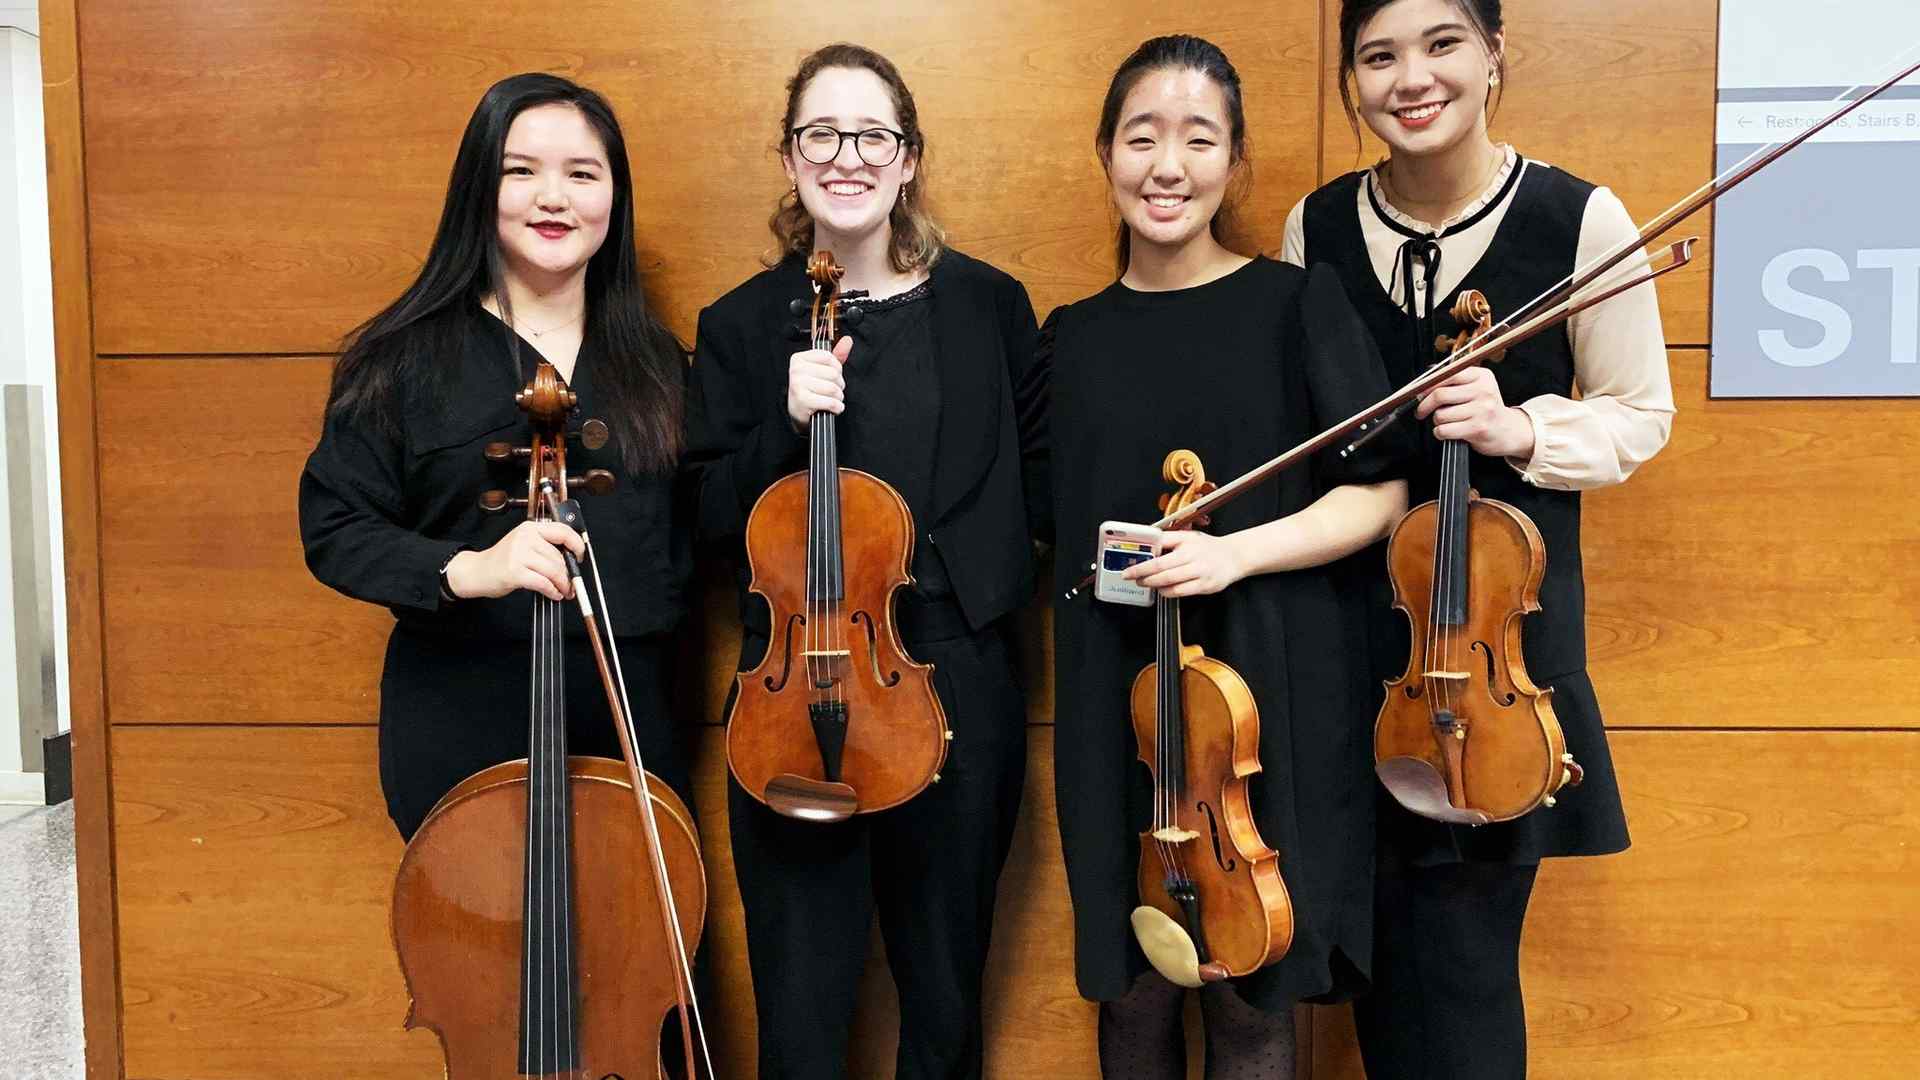 Amy poses with three other string players